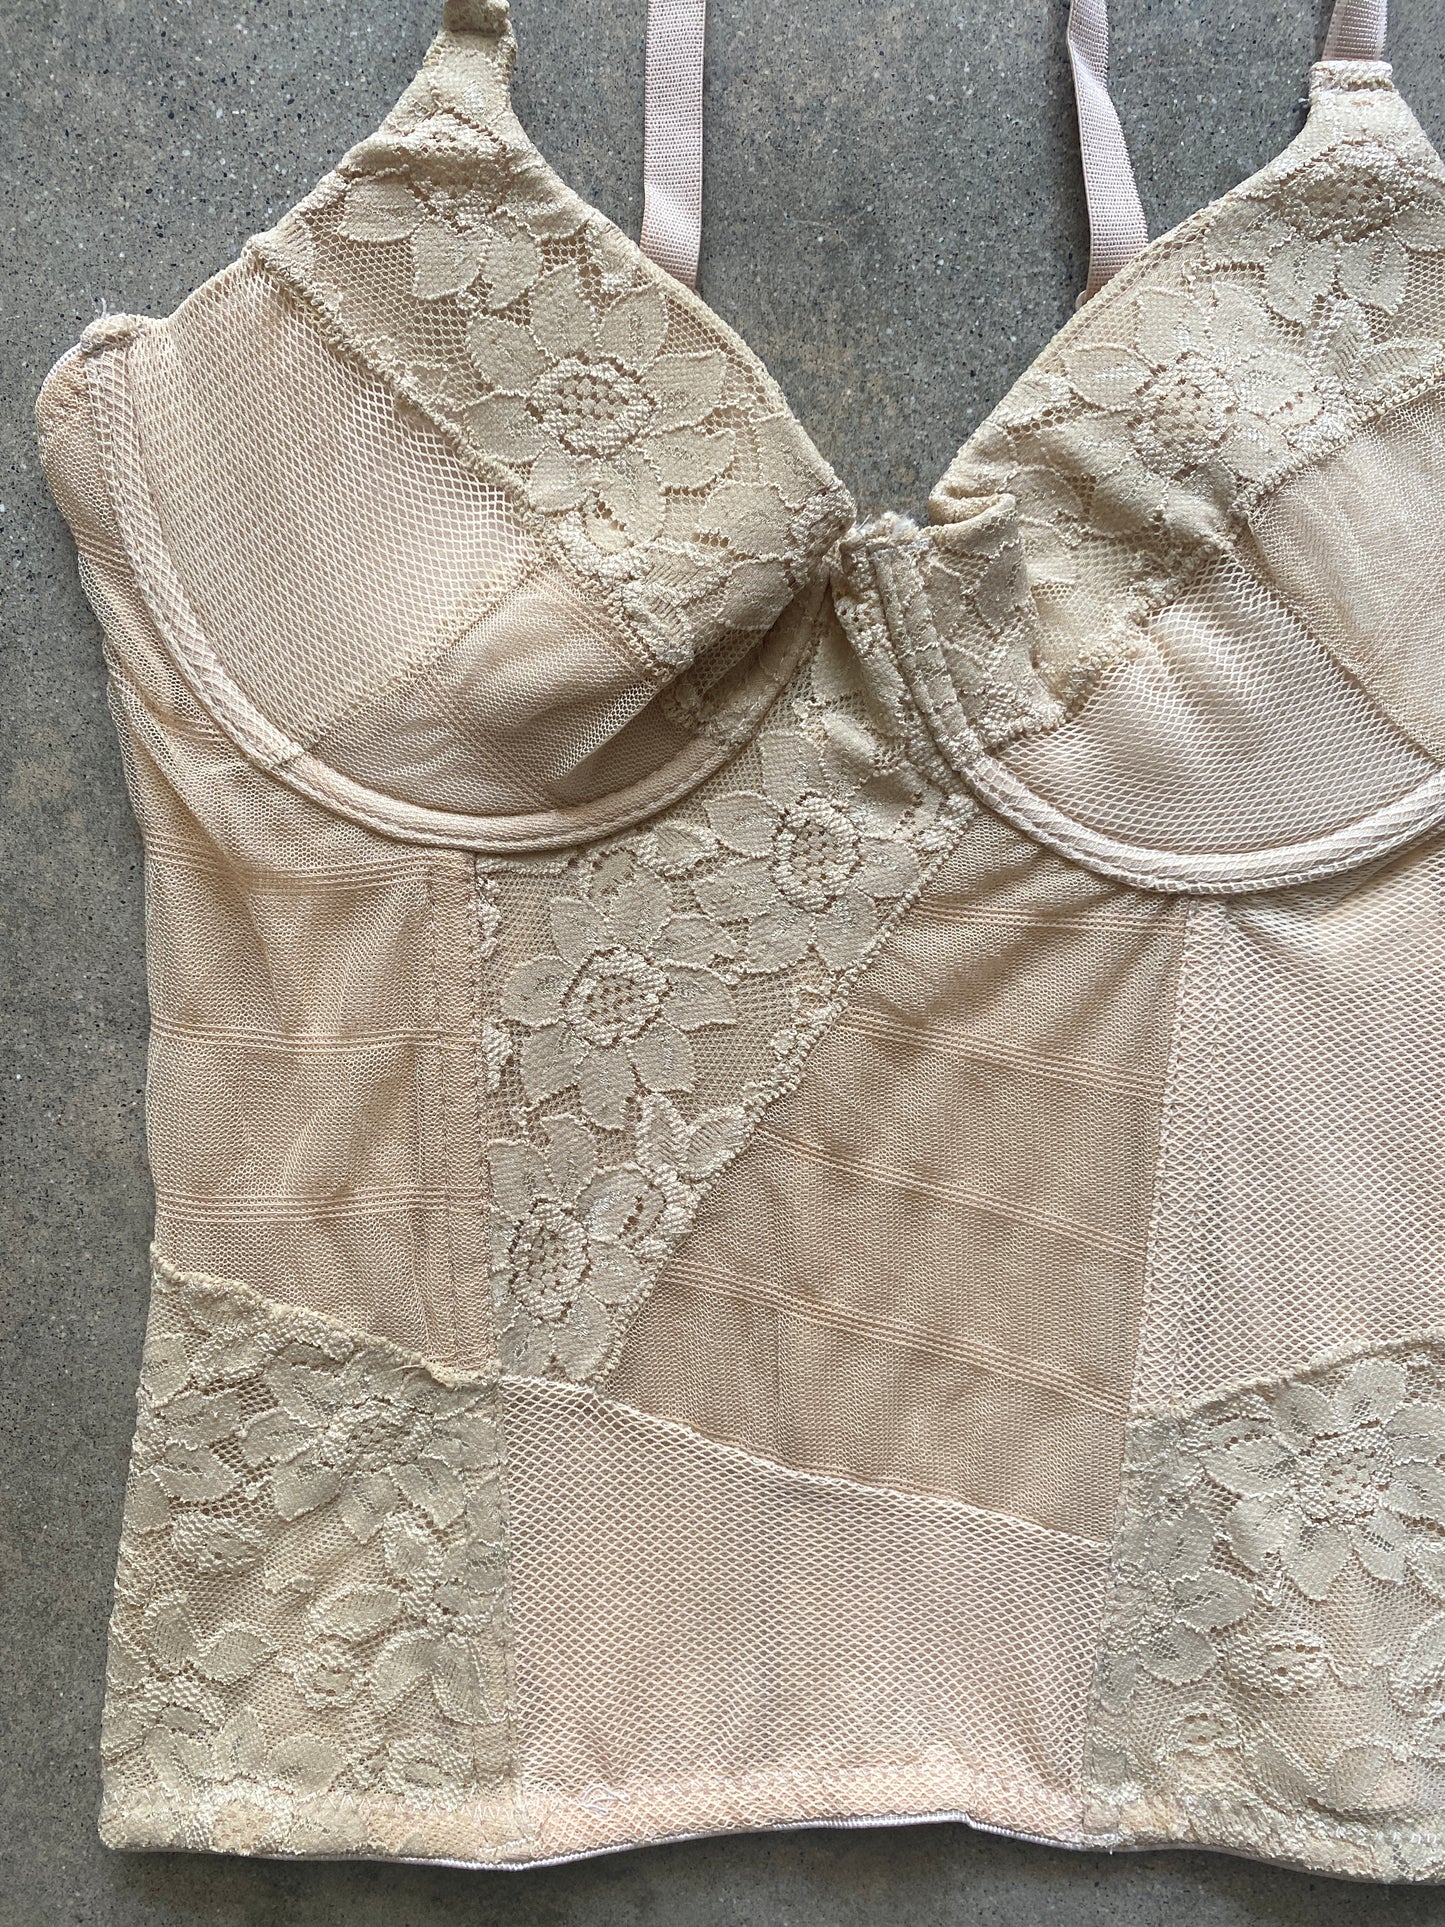 00's Deadstock Nude Lace Corset top